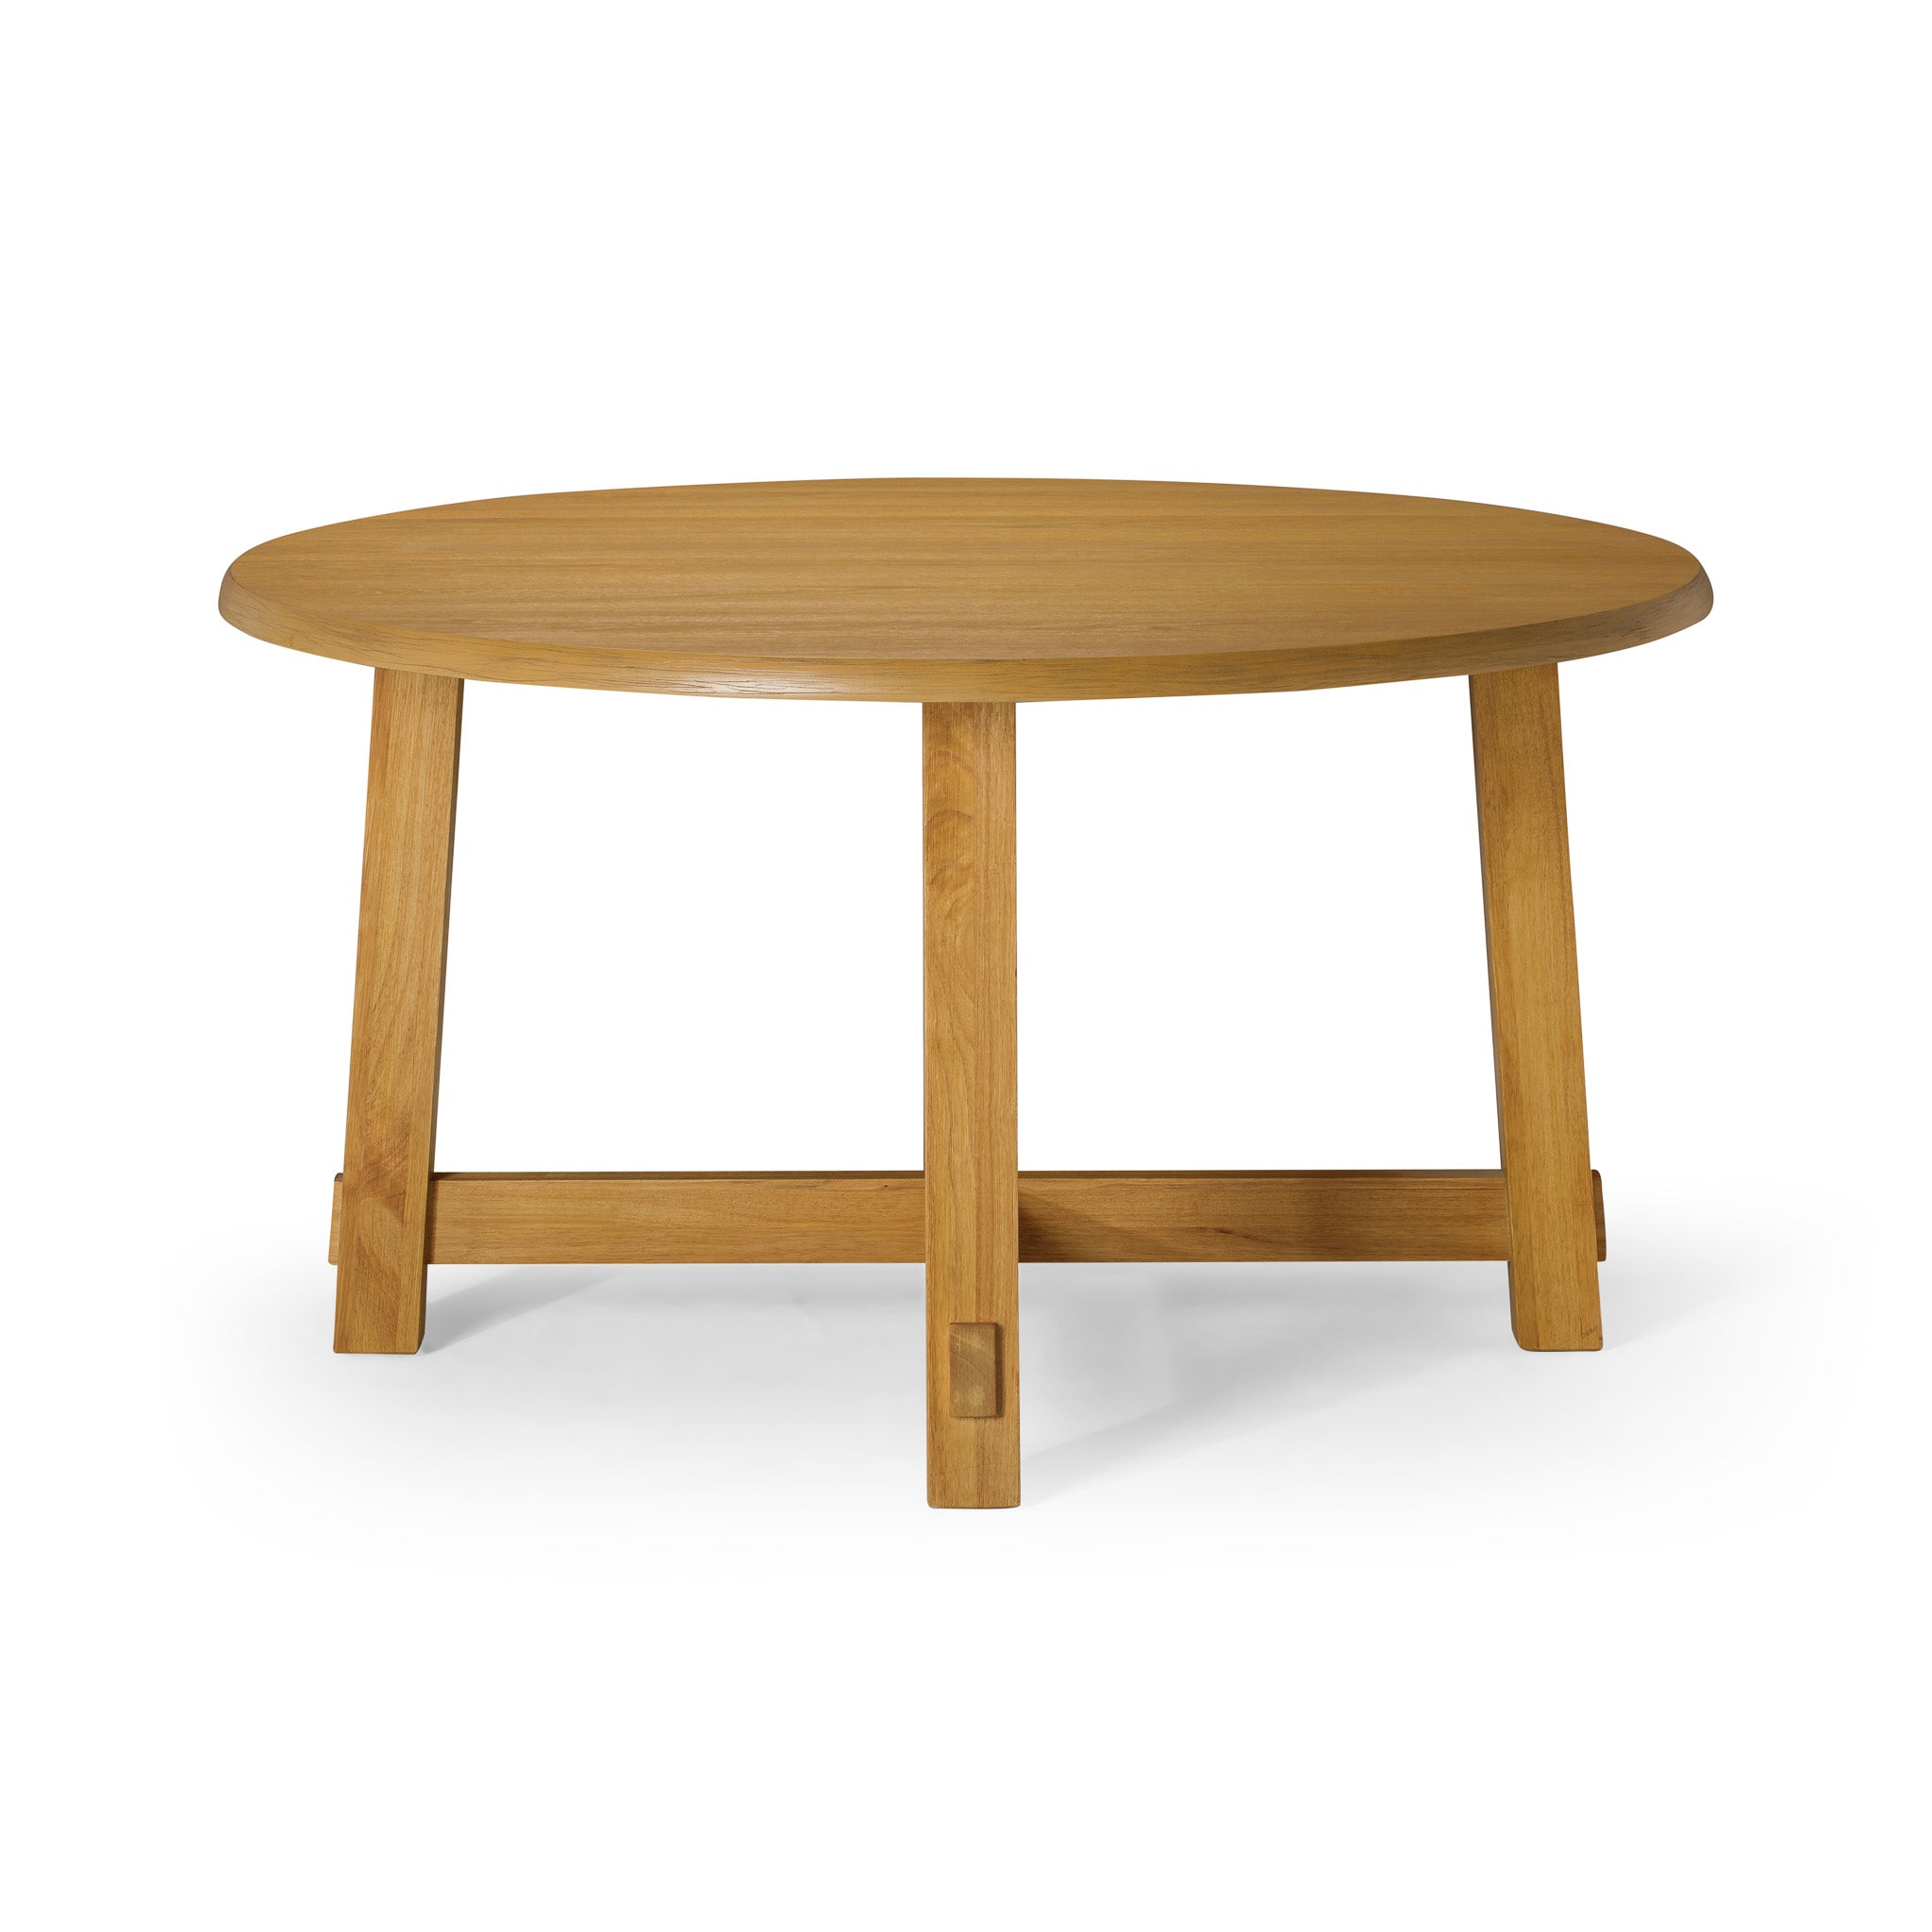 Sasha Organic Round Wooden Dining Table in Weathered Natural Finish in Dining Furniture by Maven Lane